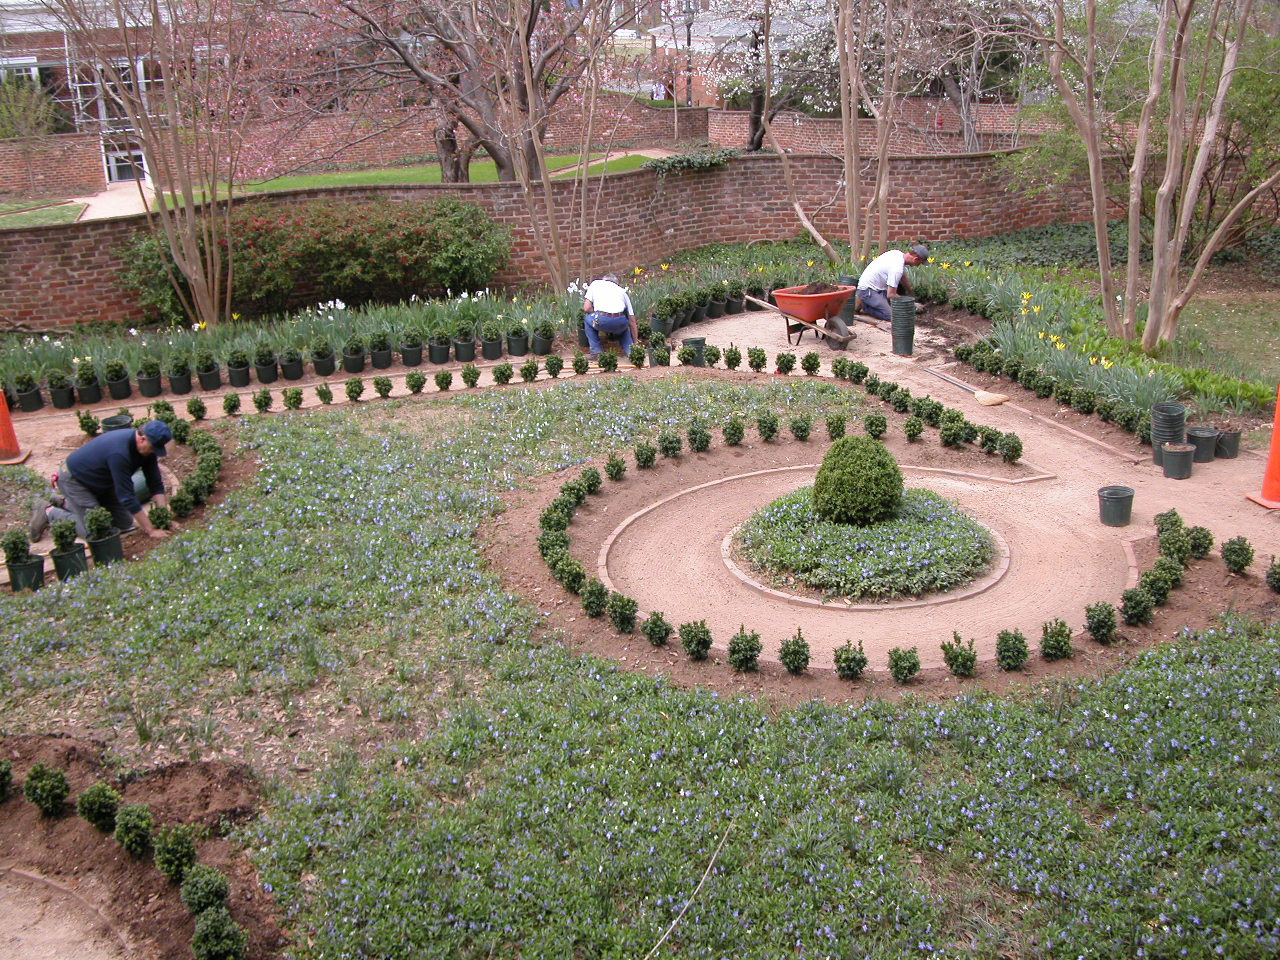 UVA Employees planting flowers in a garden